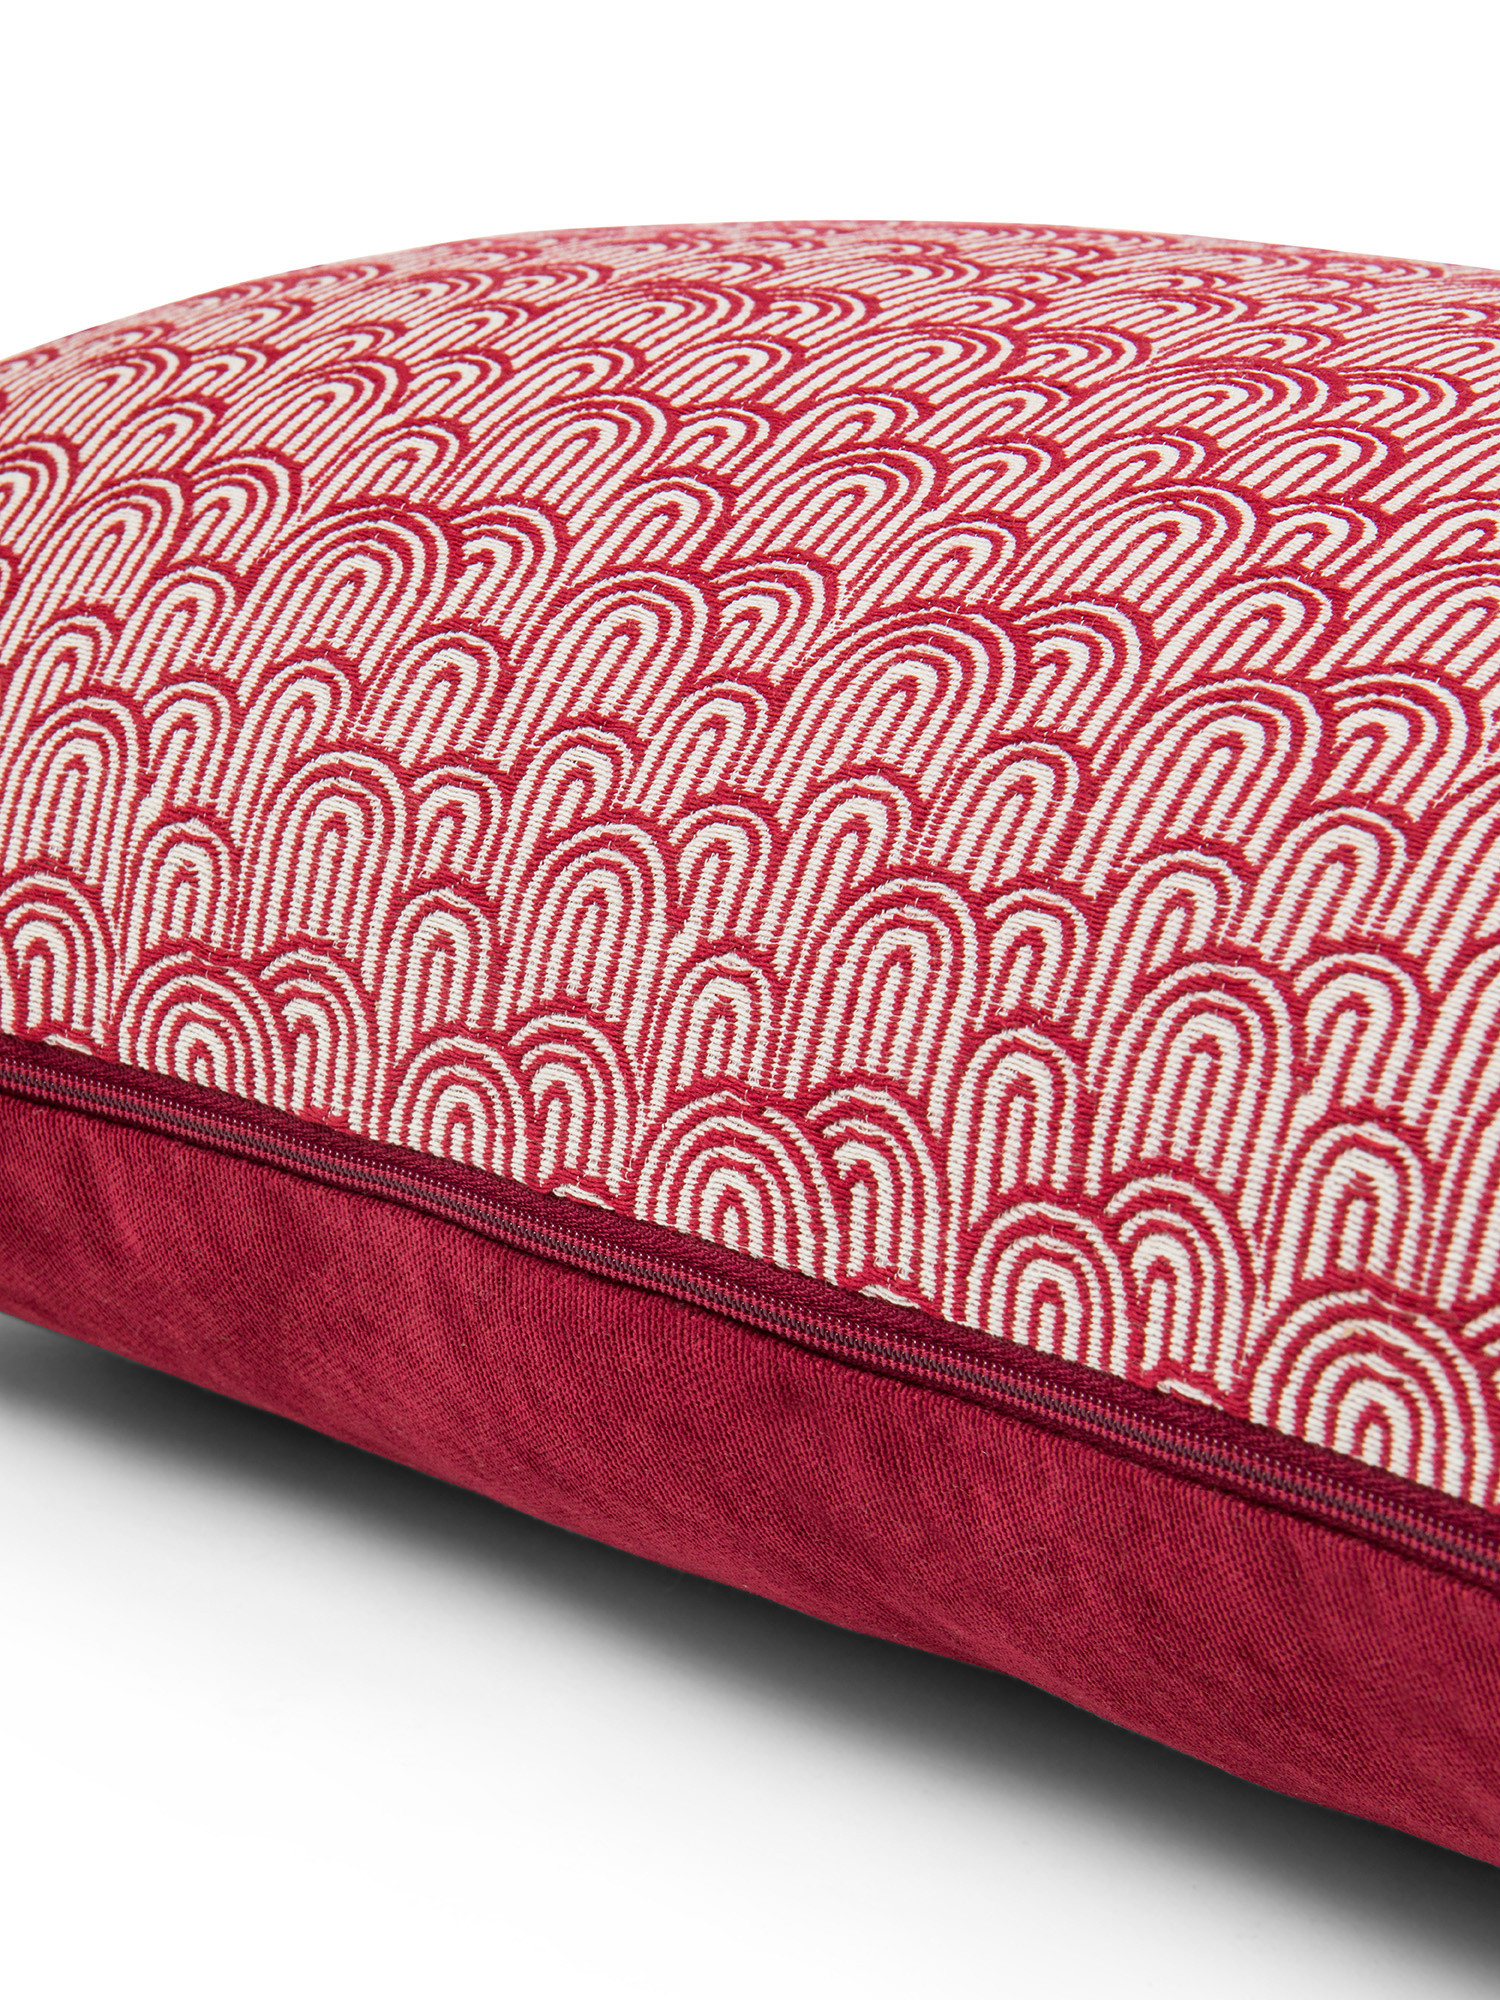 Jacquard fabric cushion with geometric pattern 35X55cm, Red, large image number 2